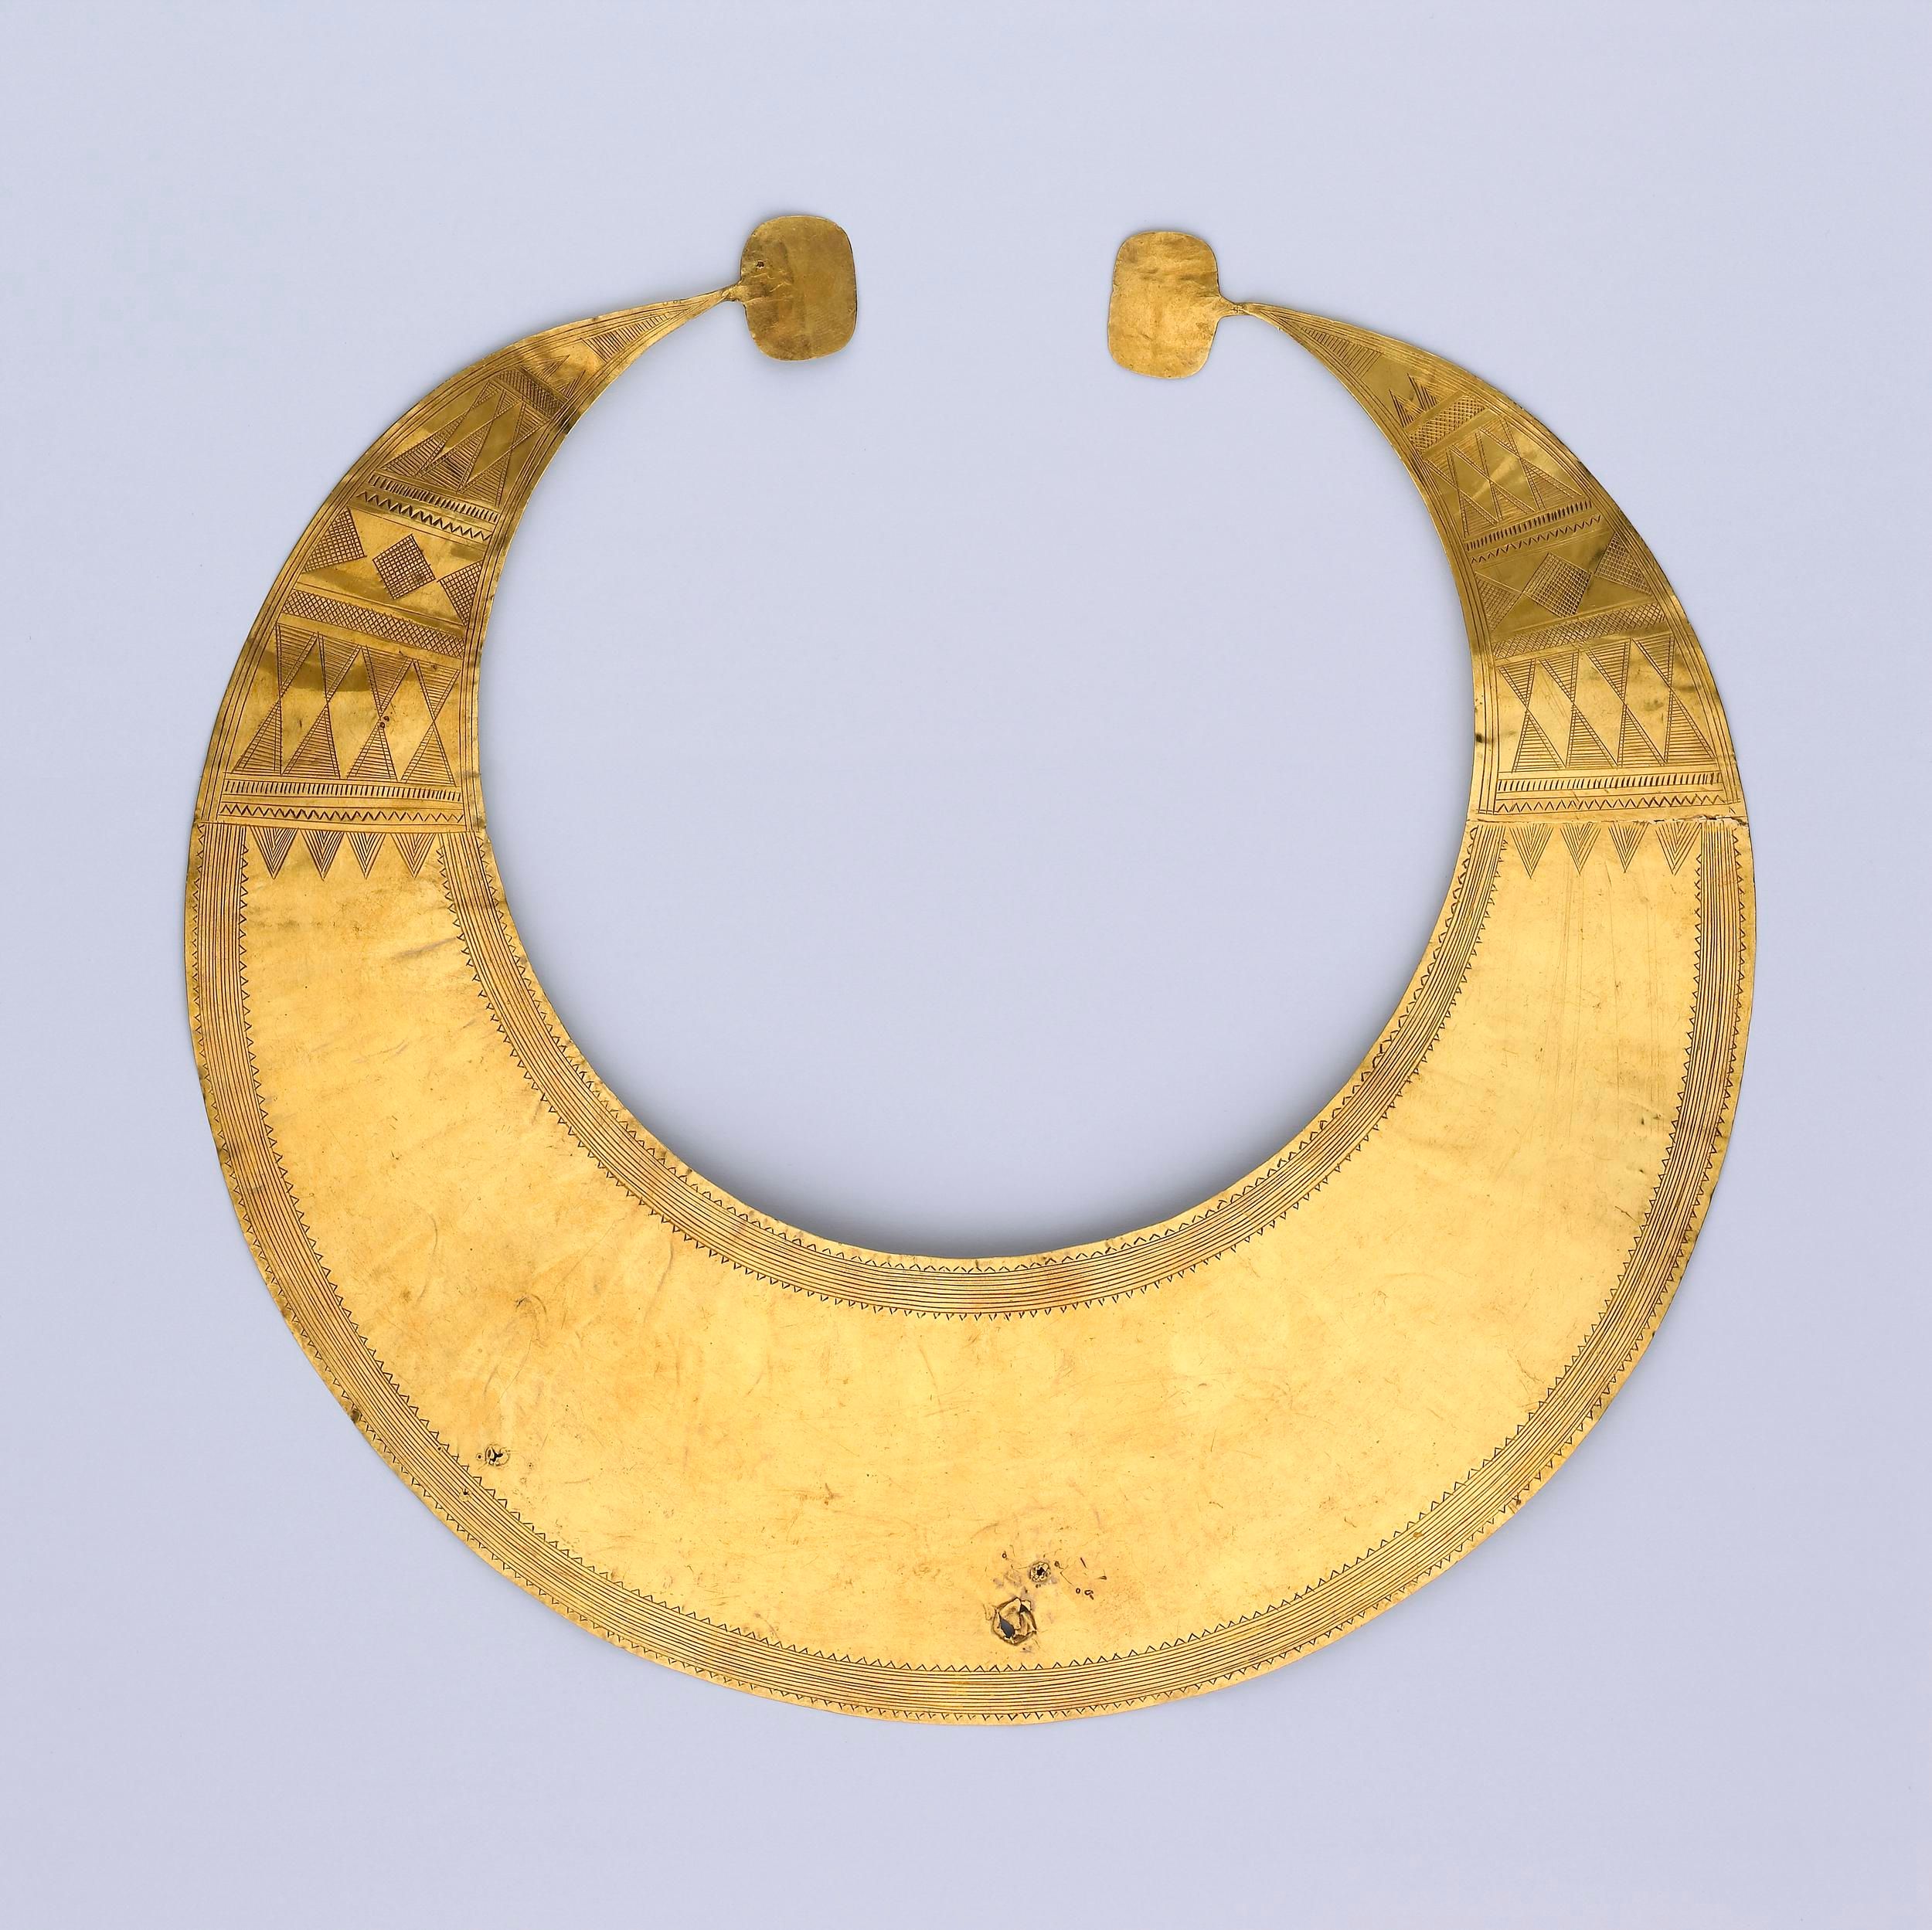 A gold lunula dating from the Early Bronze Age, British Museum. 